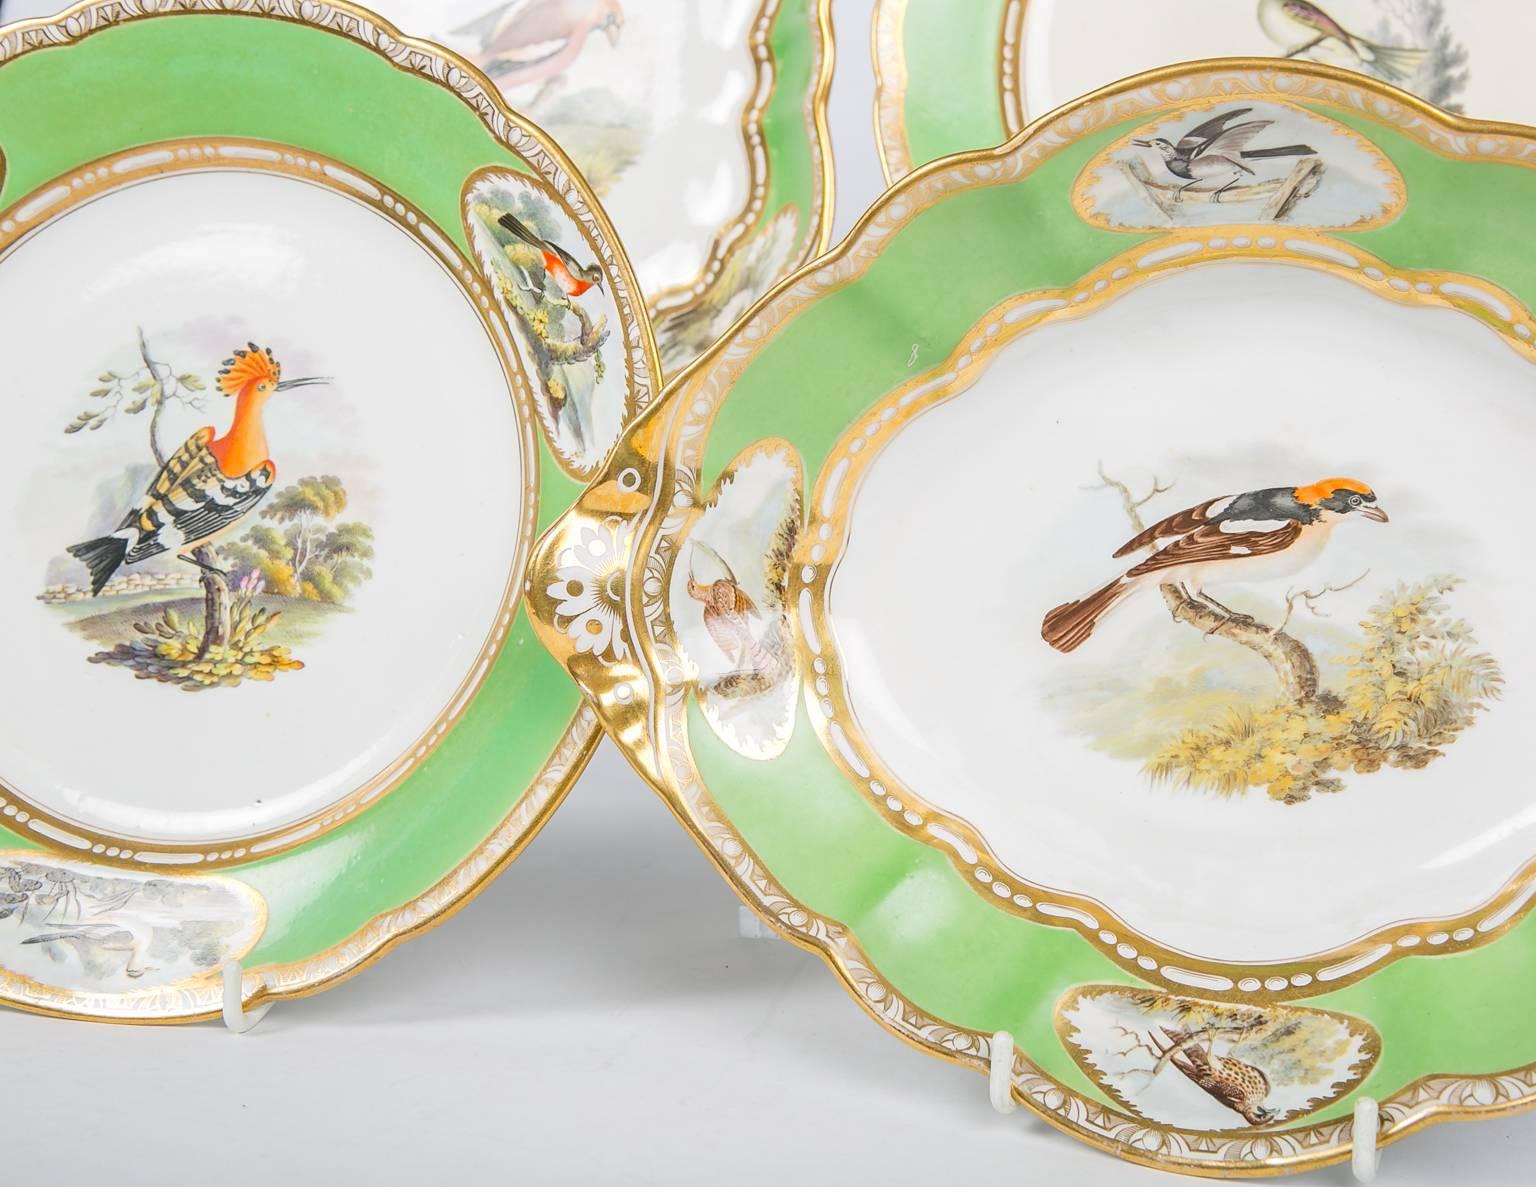 Regency Spode Dishes with Hand-Painted Birds and Apple Green Borders